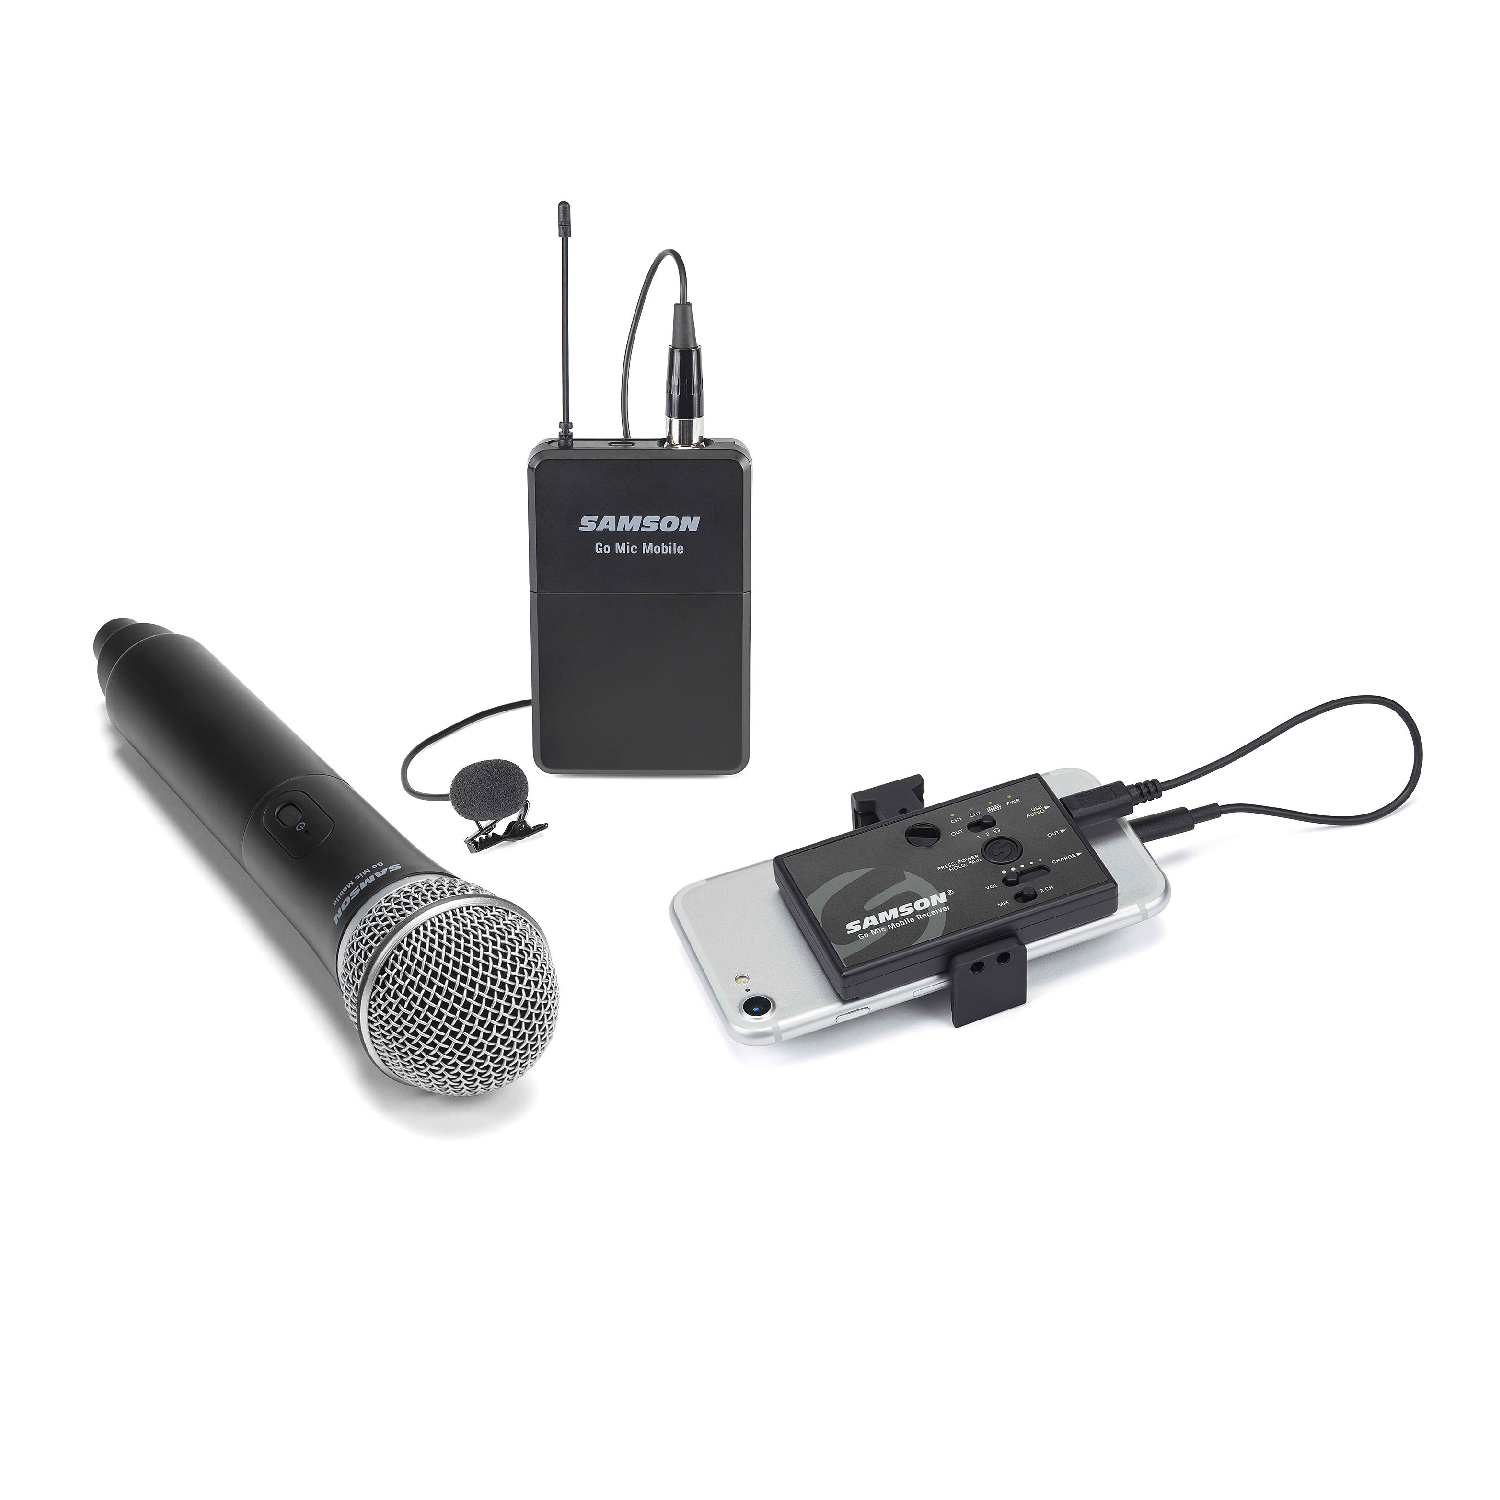 Professional Wireless System for Mobile Video Go Mic Mobile series Samson